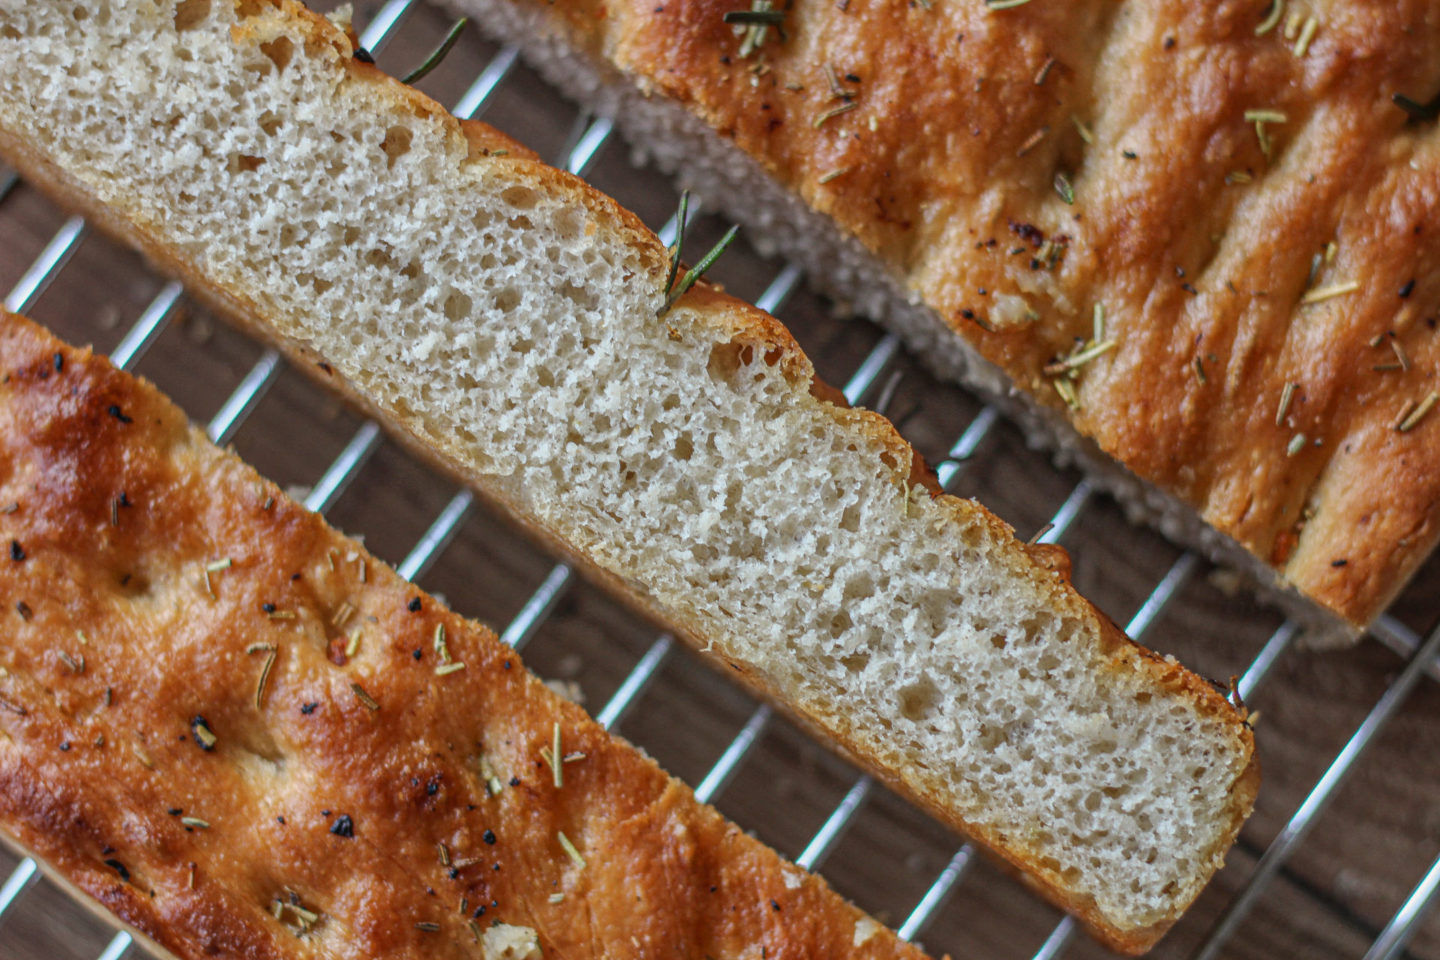 long slice of garlic and rosemary focaccia on its side. showing the texture inside